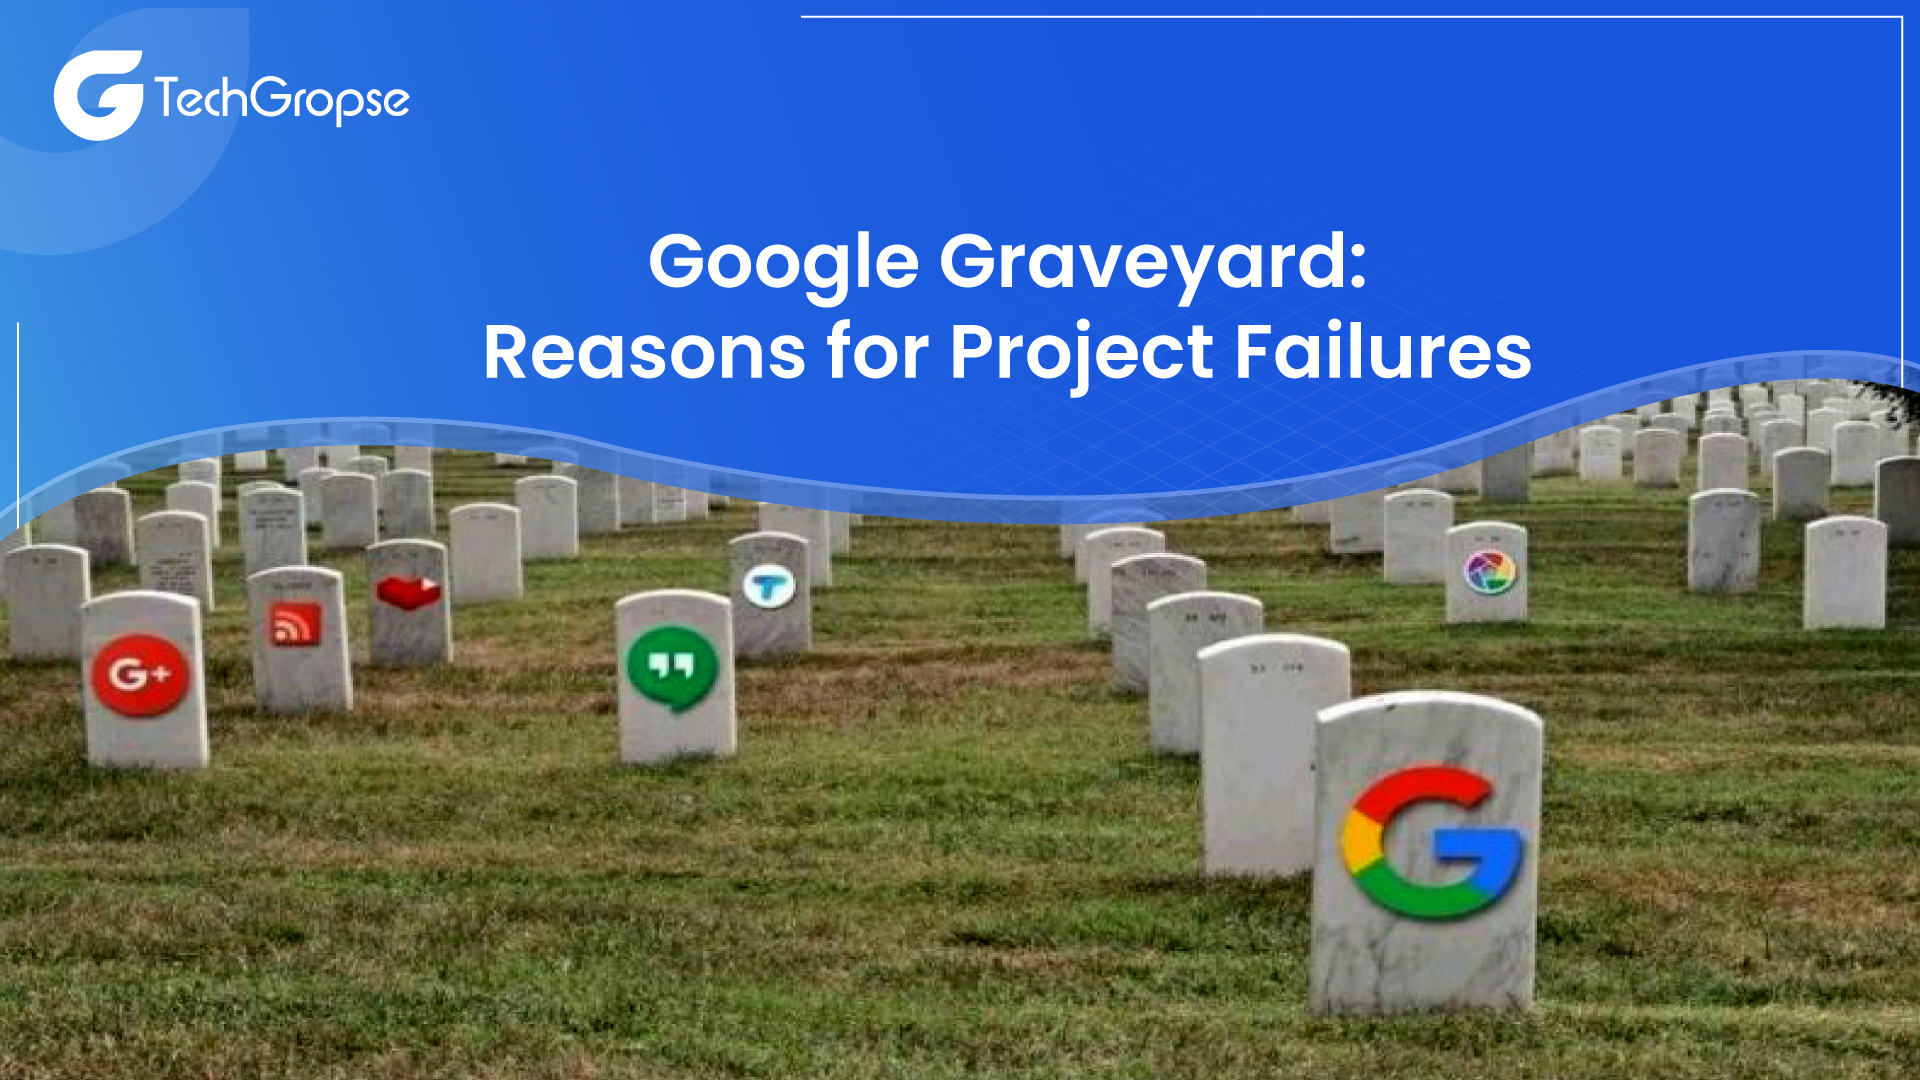 Google Graveyard: Reasons for Project Failures